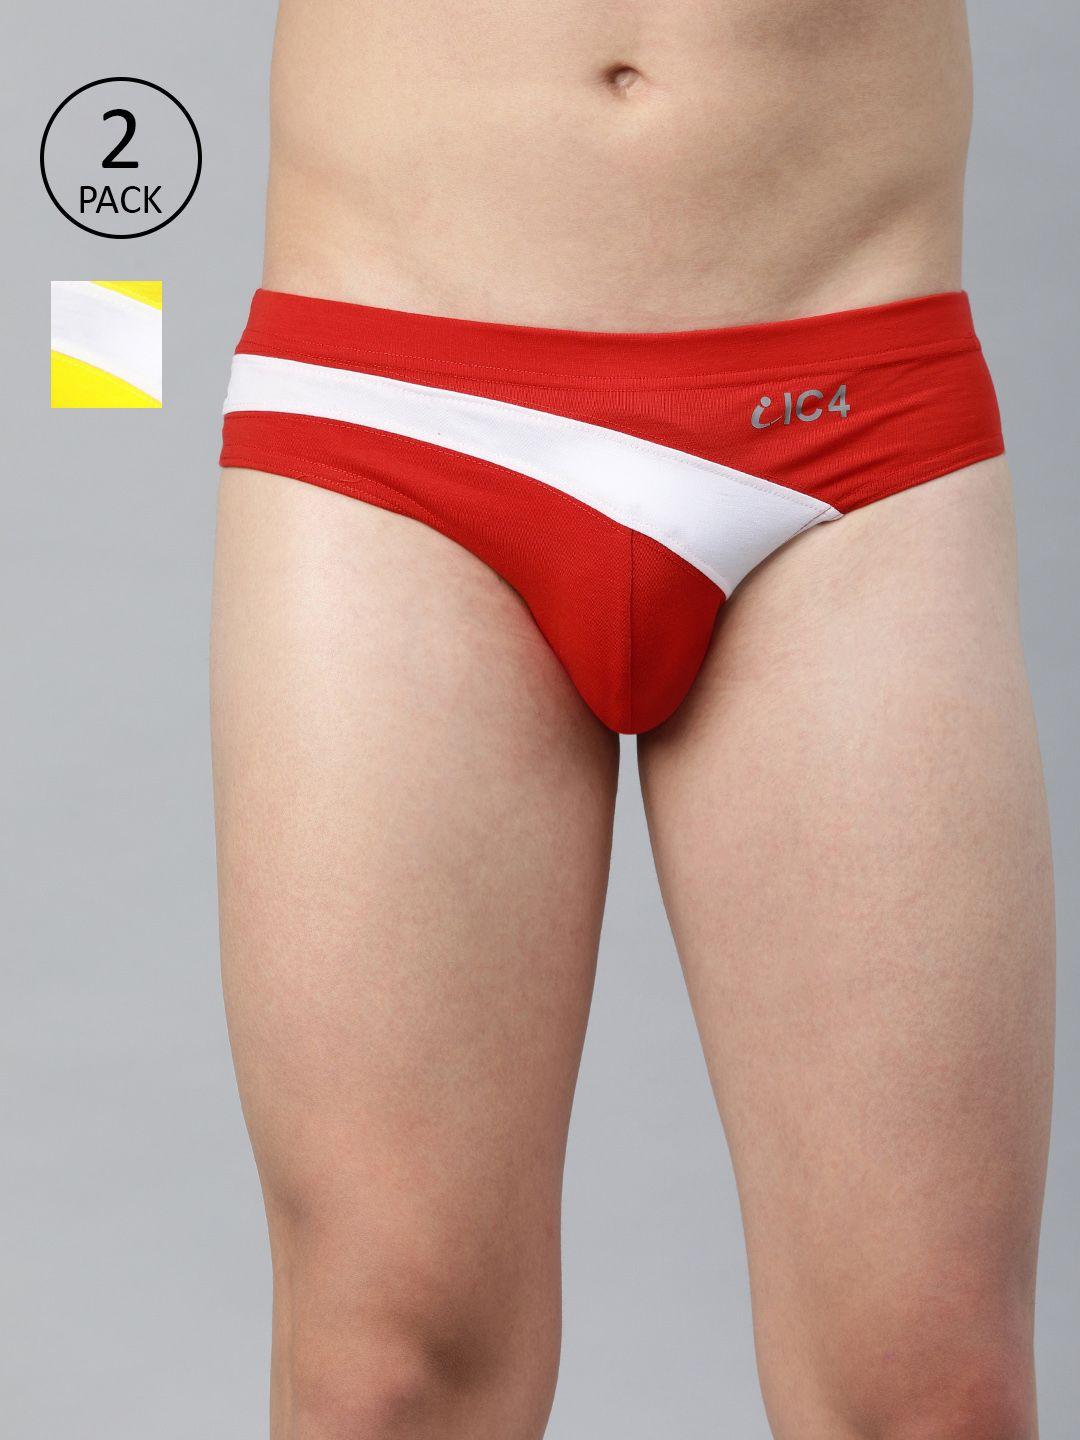 ic4 men pack of 2 assorted colourblocked briefs 0r-y265p2